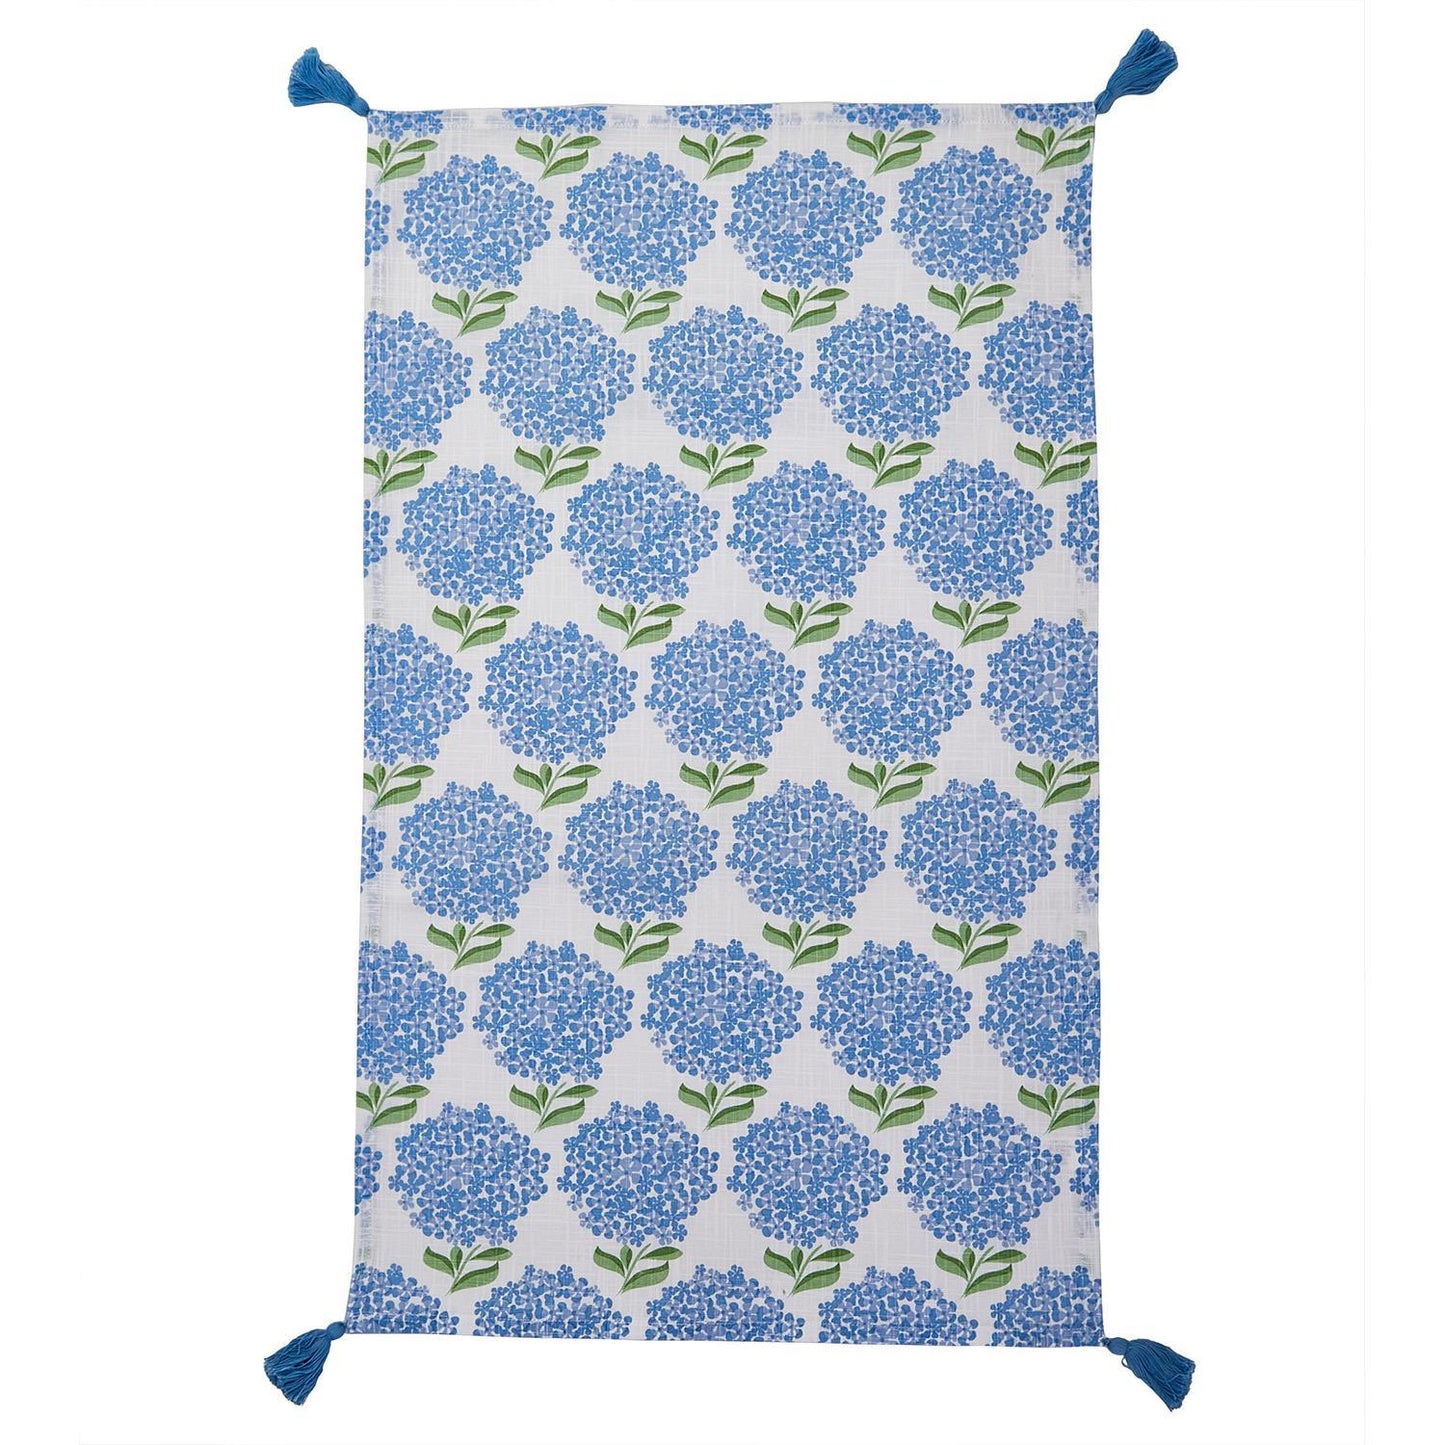 Two's Company Hydrangea Set Of 2 Dish Towels With Decorative Tassels - Cotton.